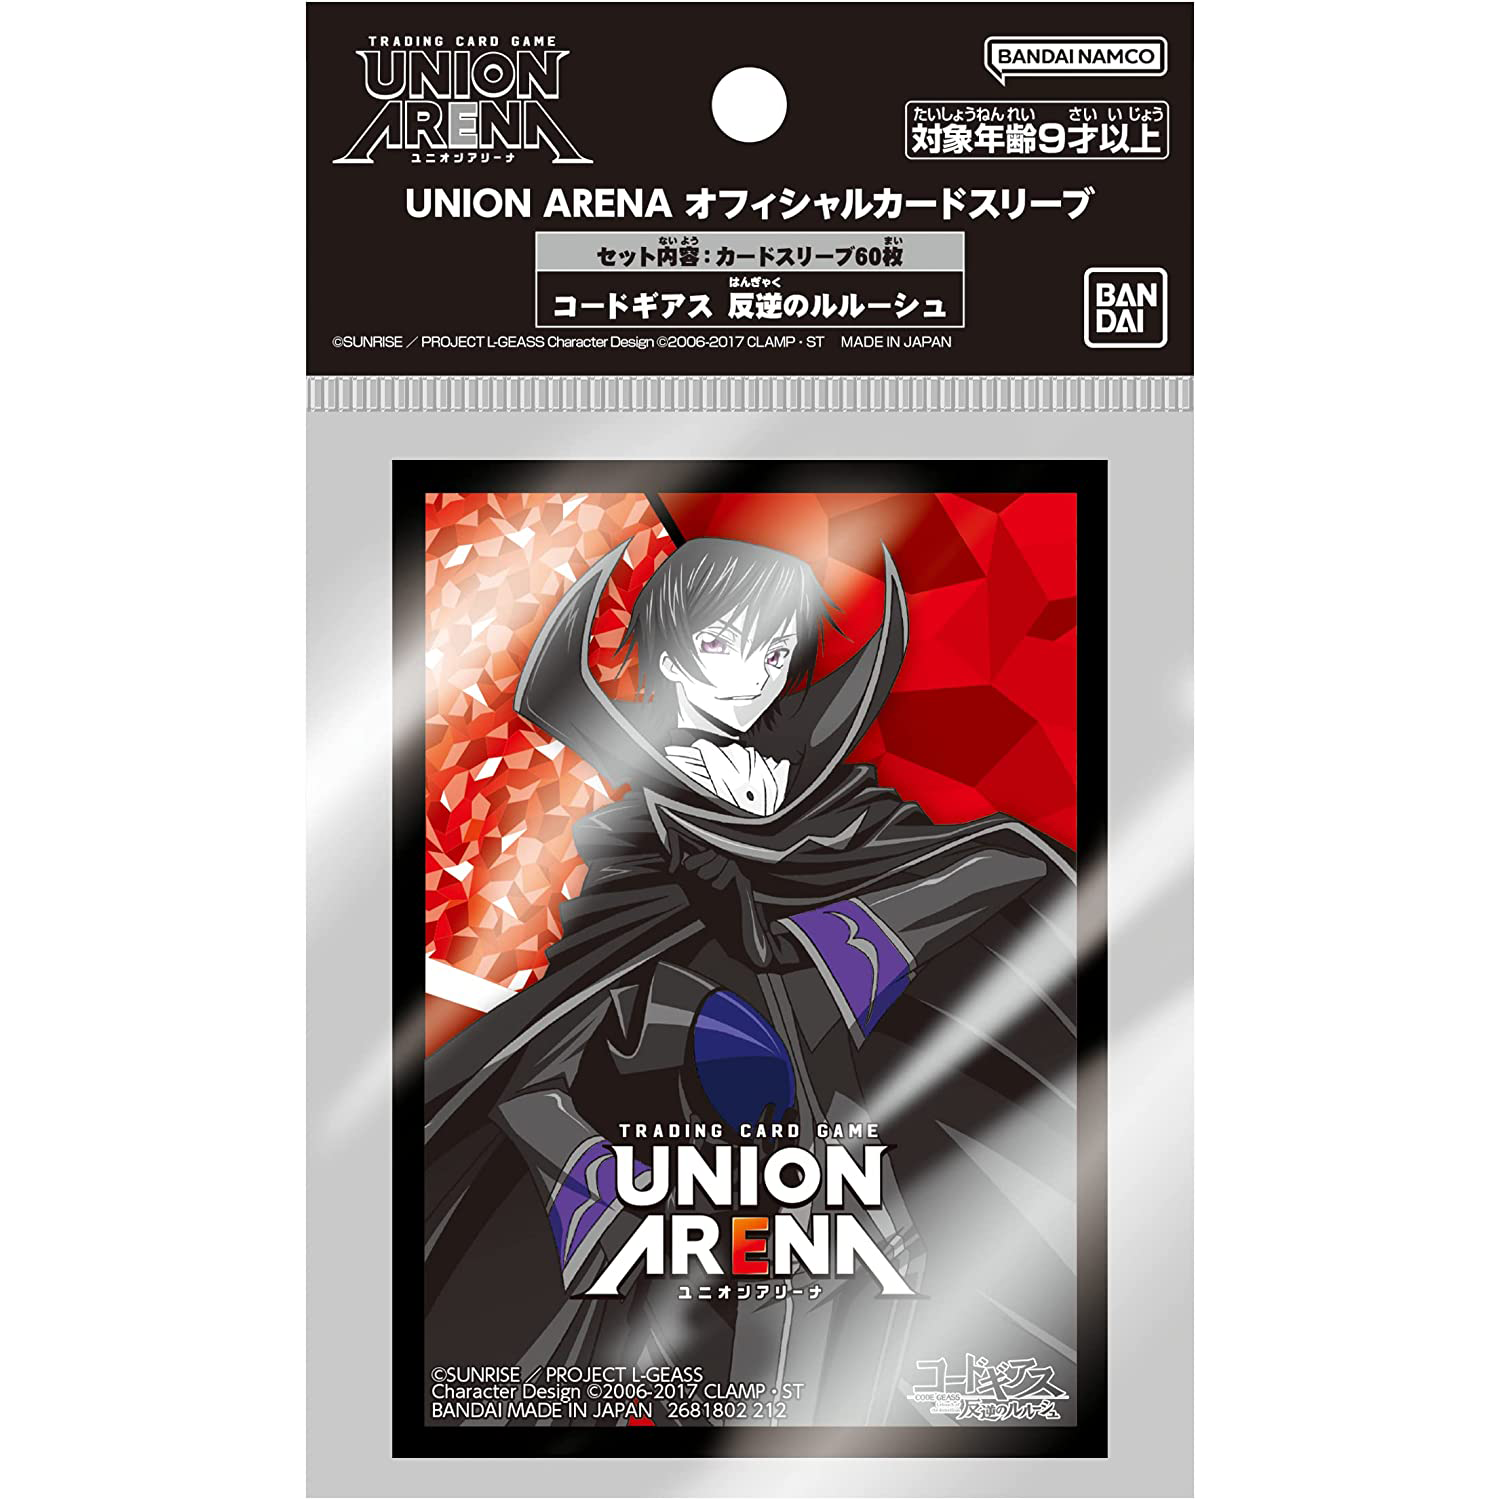 TRADING CARD GAME UNION ARENA Official Card Sleeve CODE GEASS Lelouch of the Rebellion